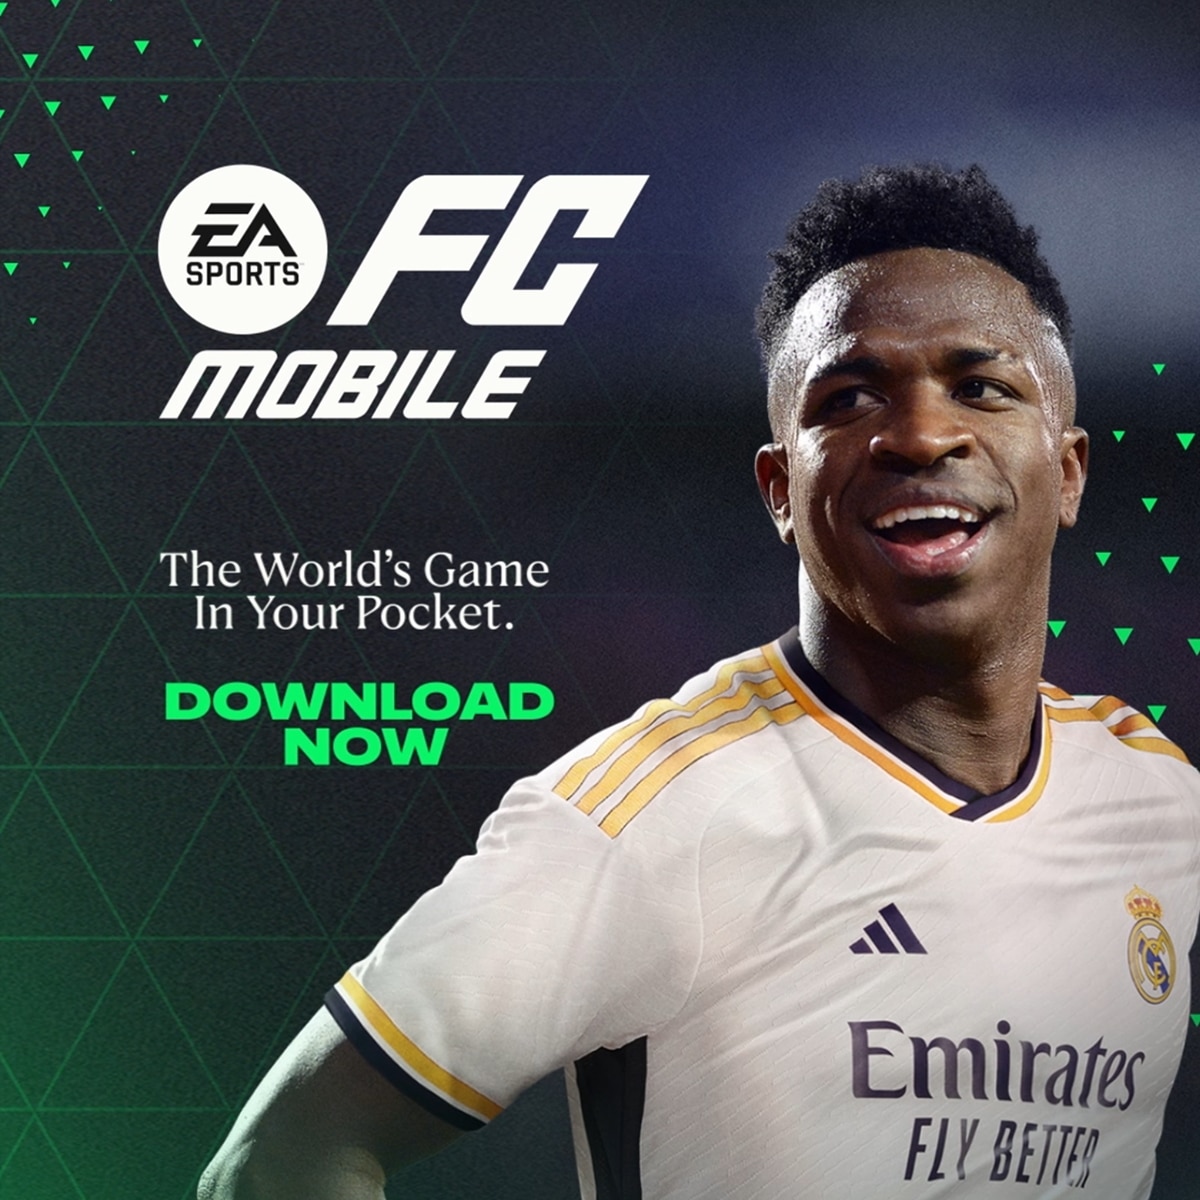 EA SPORTS FC MOBILE on X: The World's Game in Your Pocket. EA